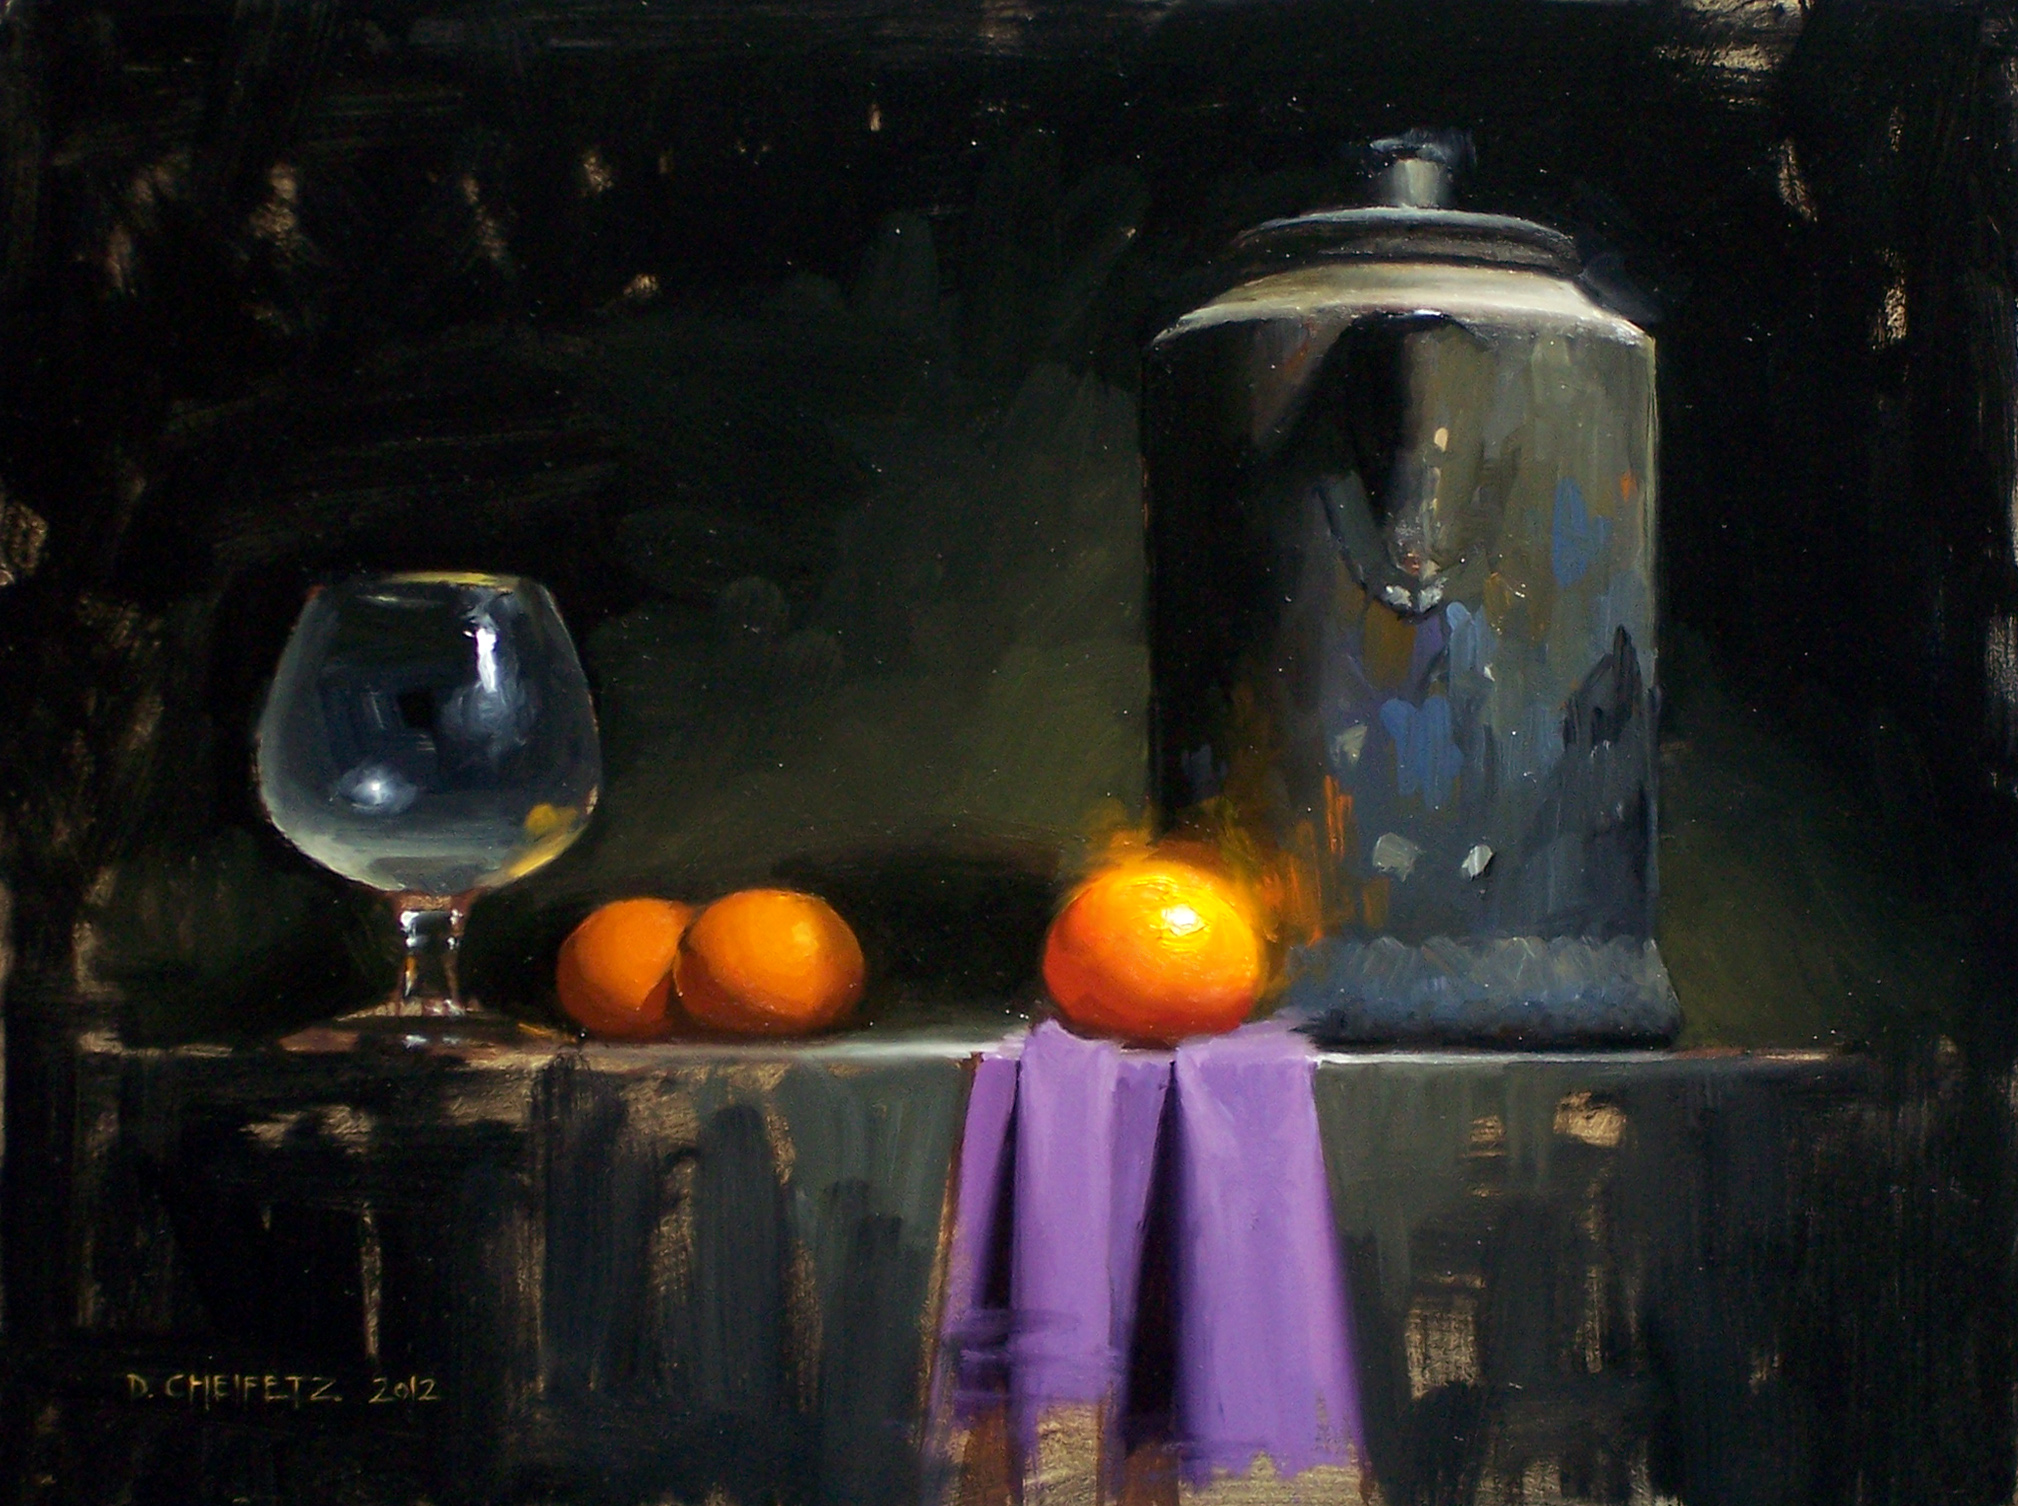 Still life painting how-to - David Cheifetz, "Reigning Mandarin," 9 x 12 inches, Oil on panel